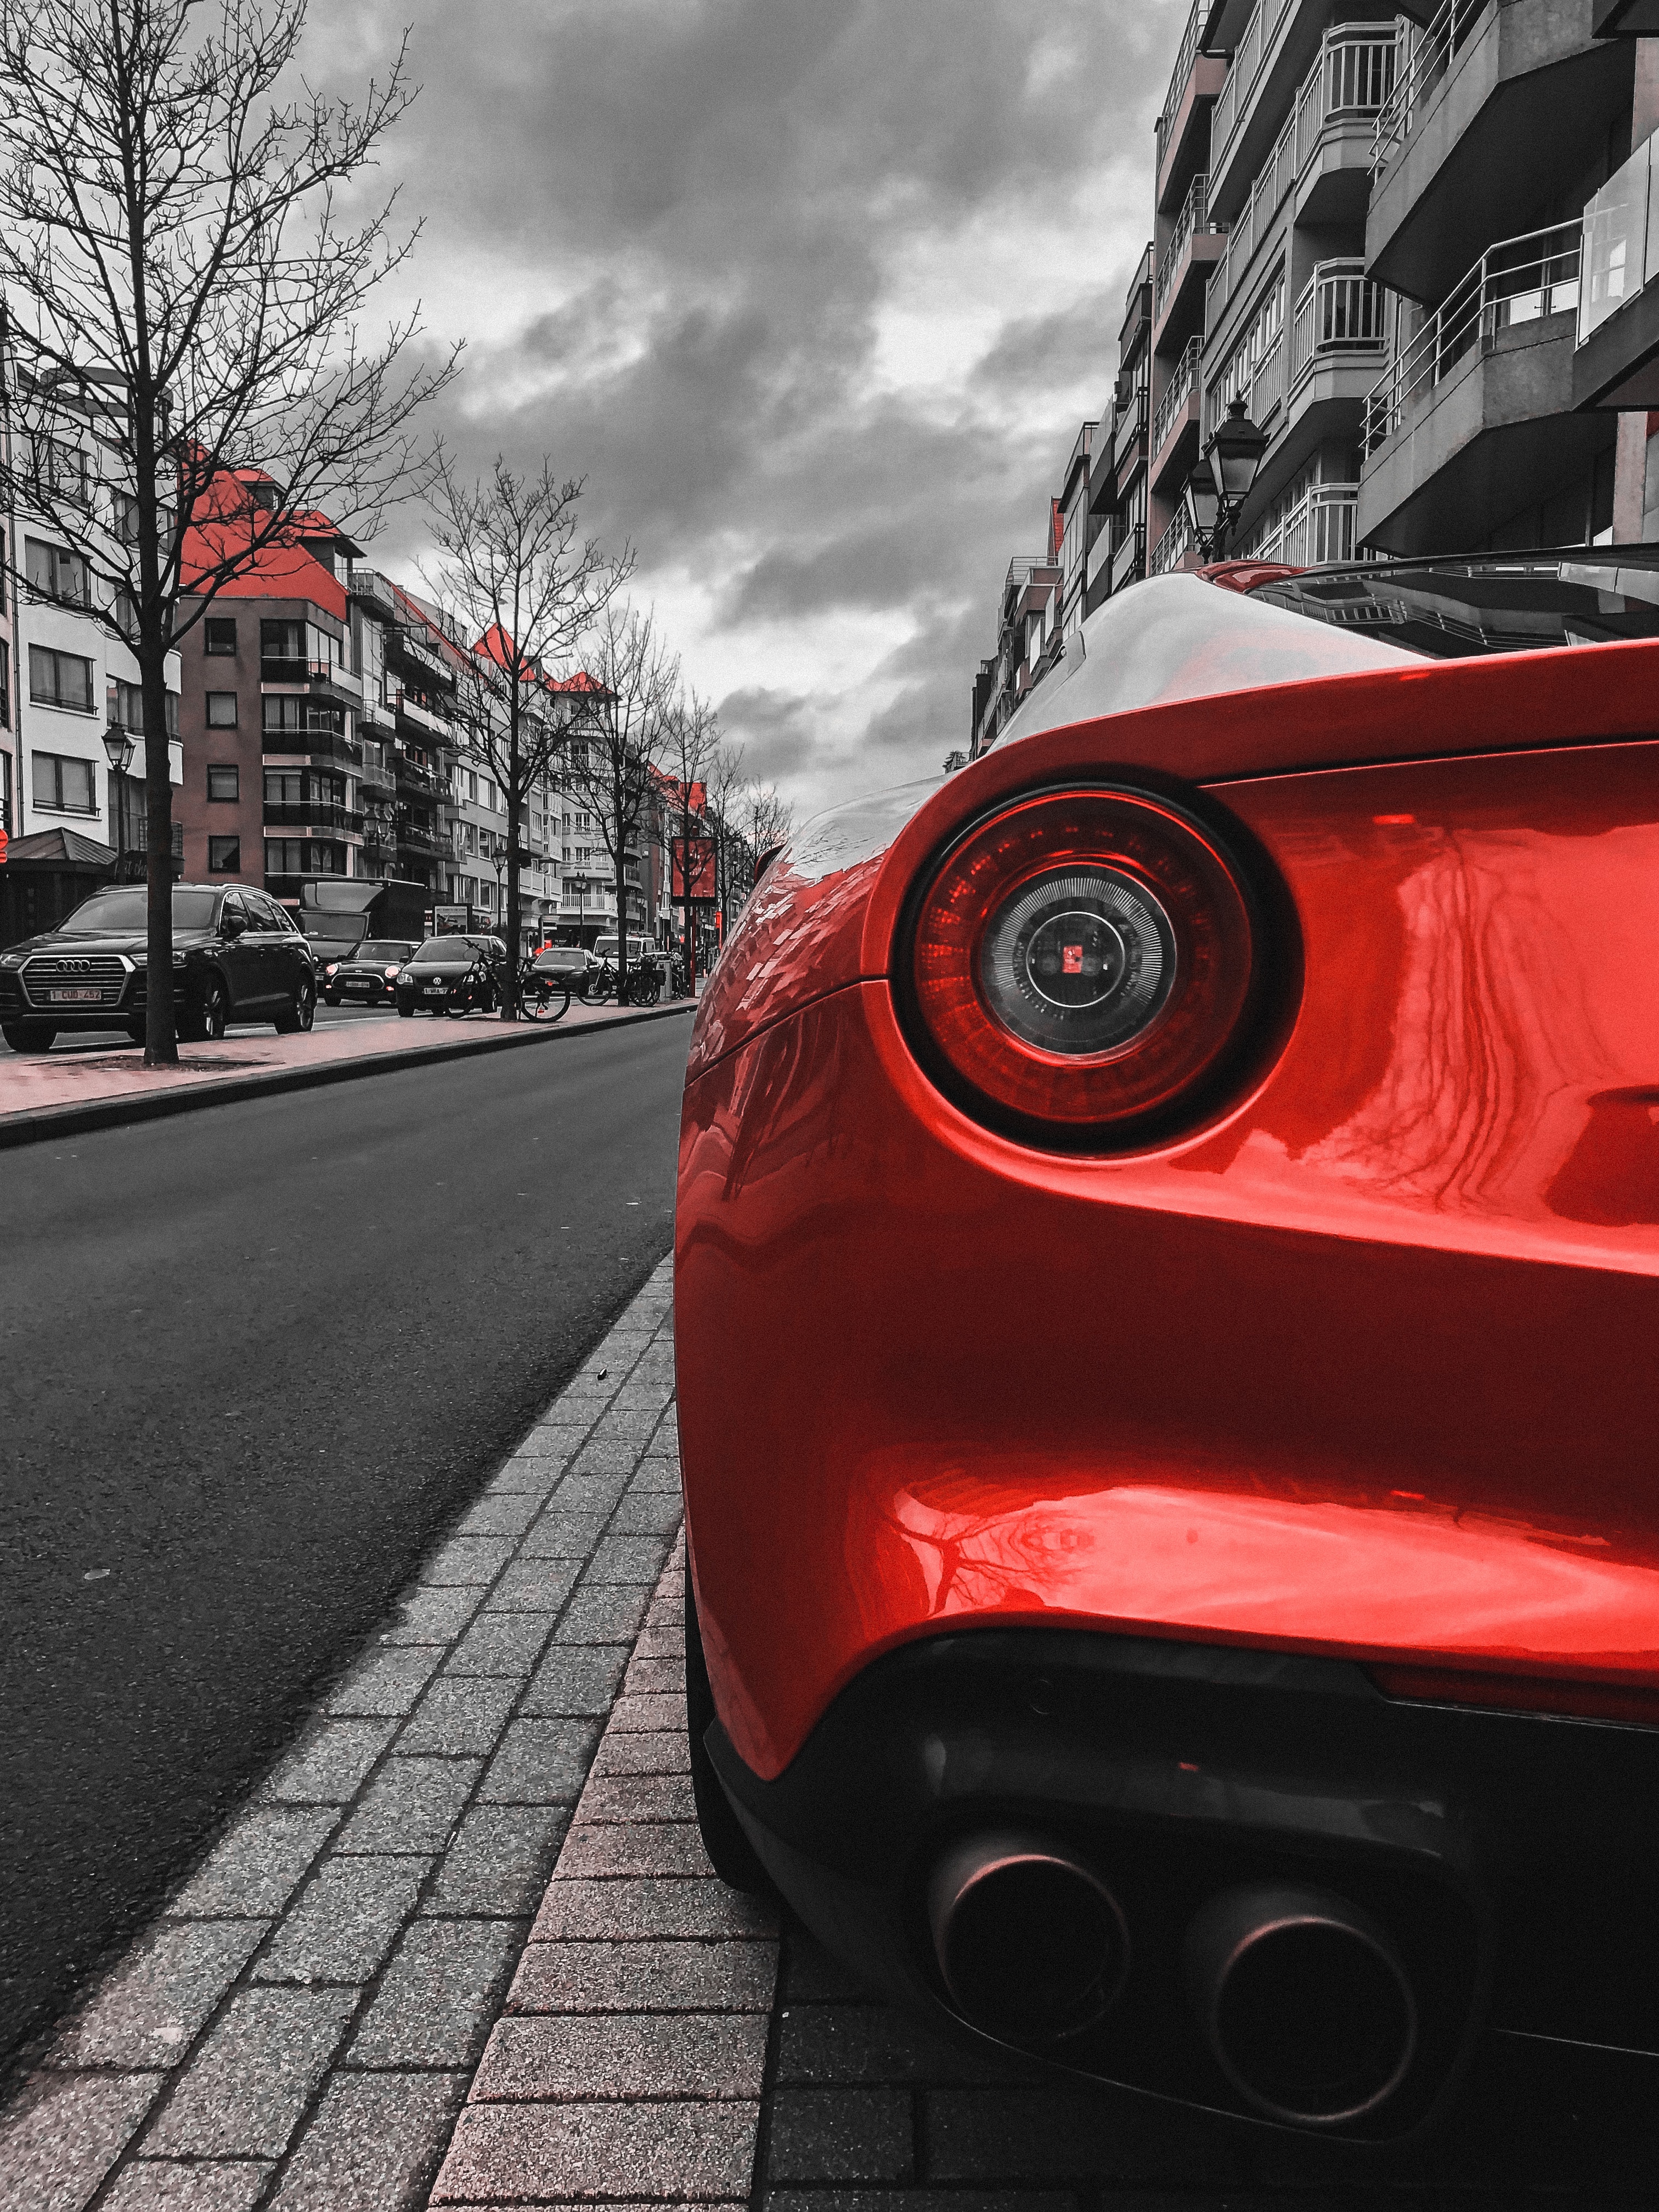 back view, street, sports car, cars, rear view, sports, red, car, machine phone background